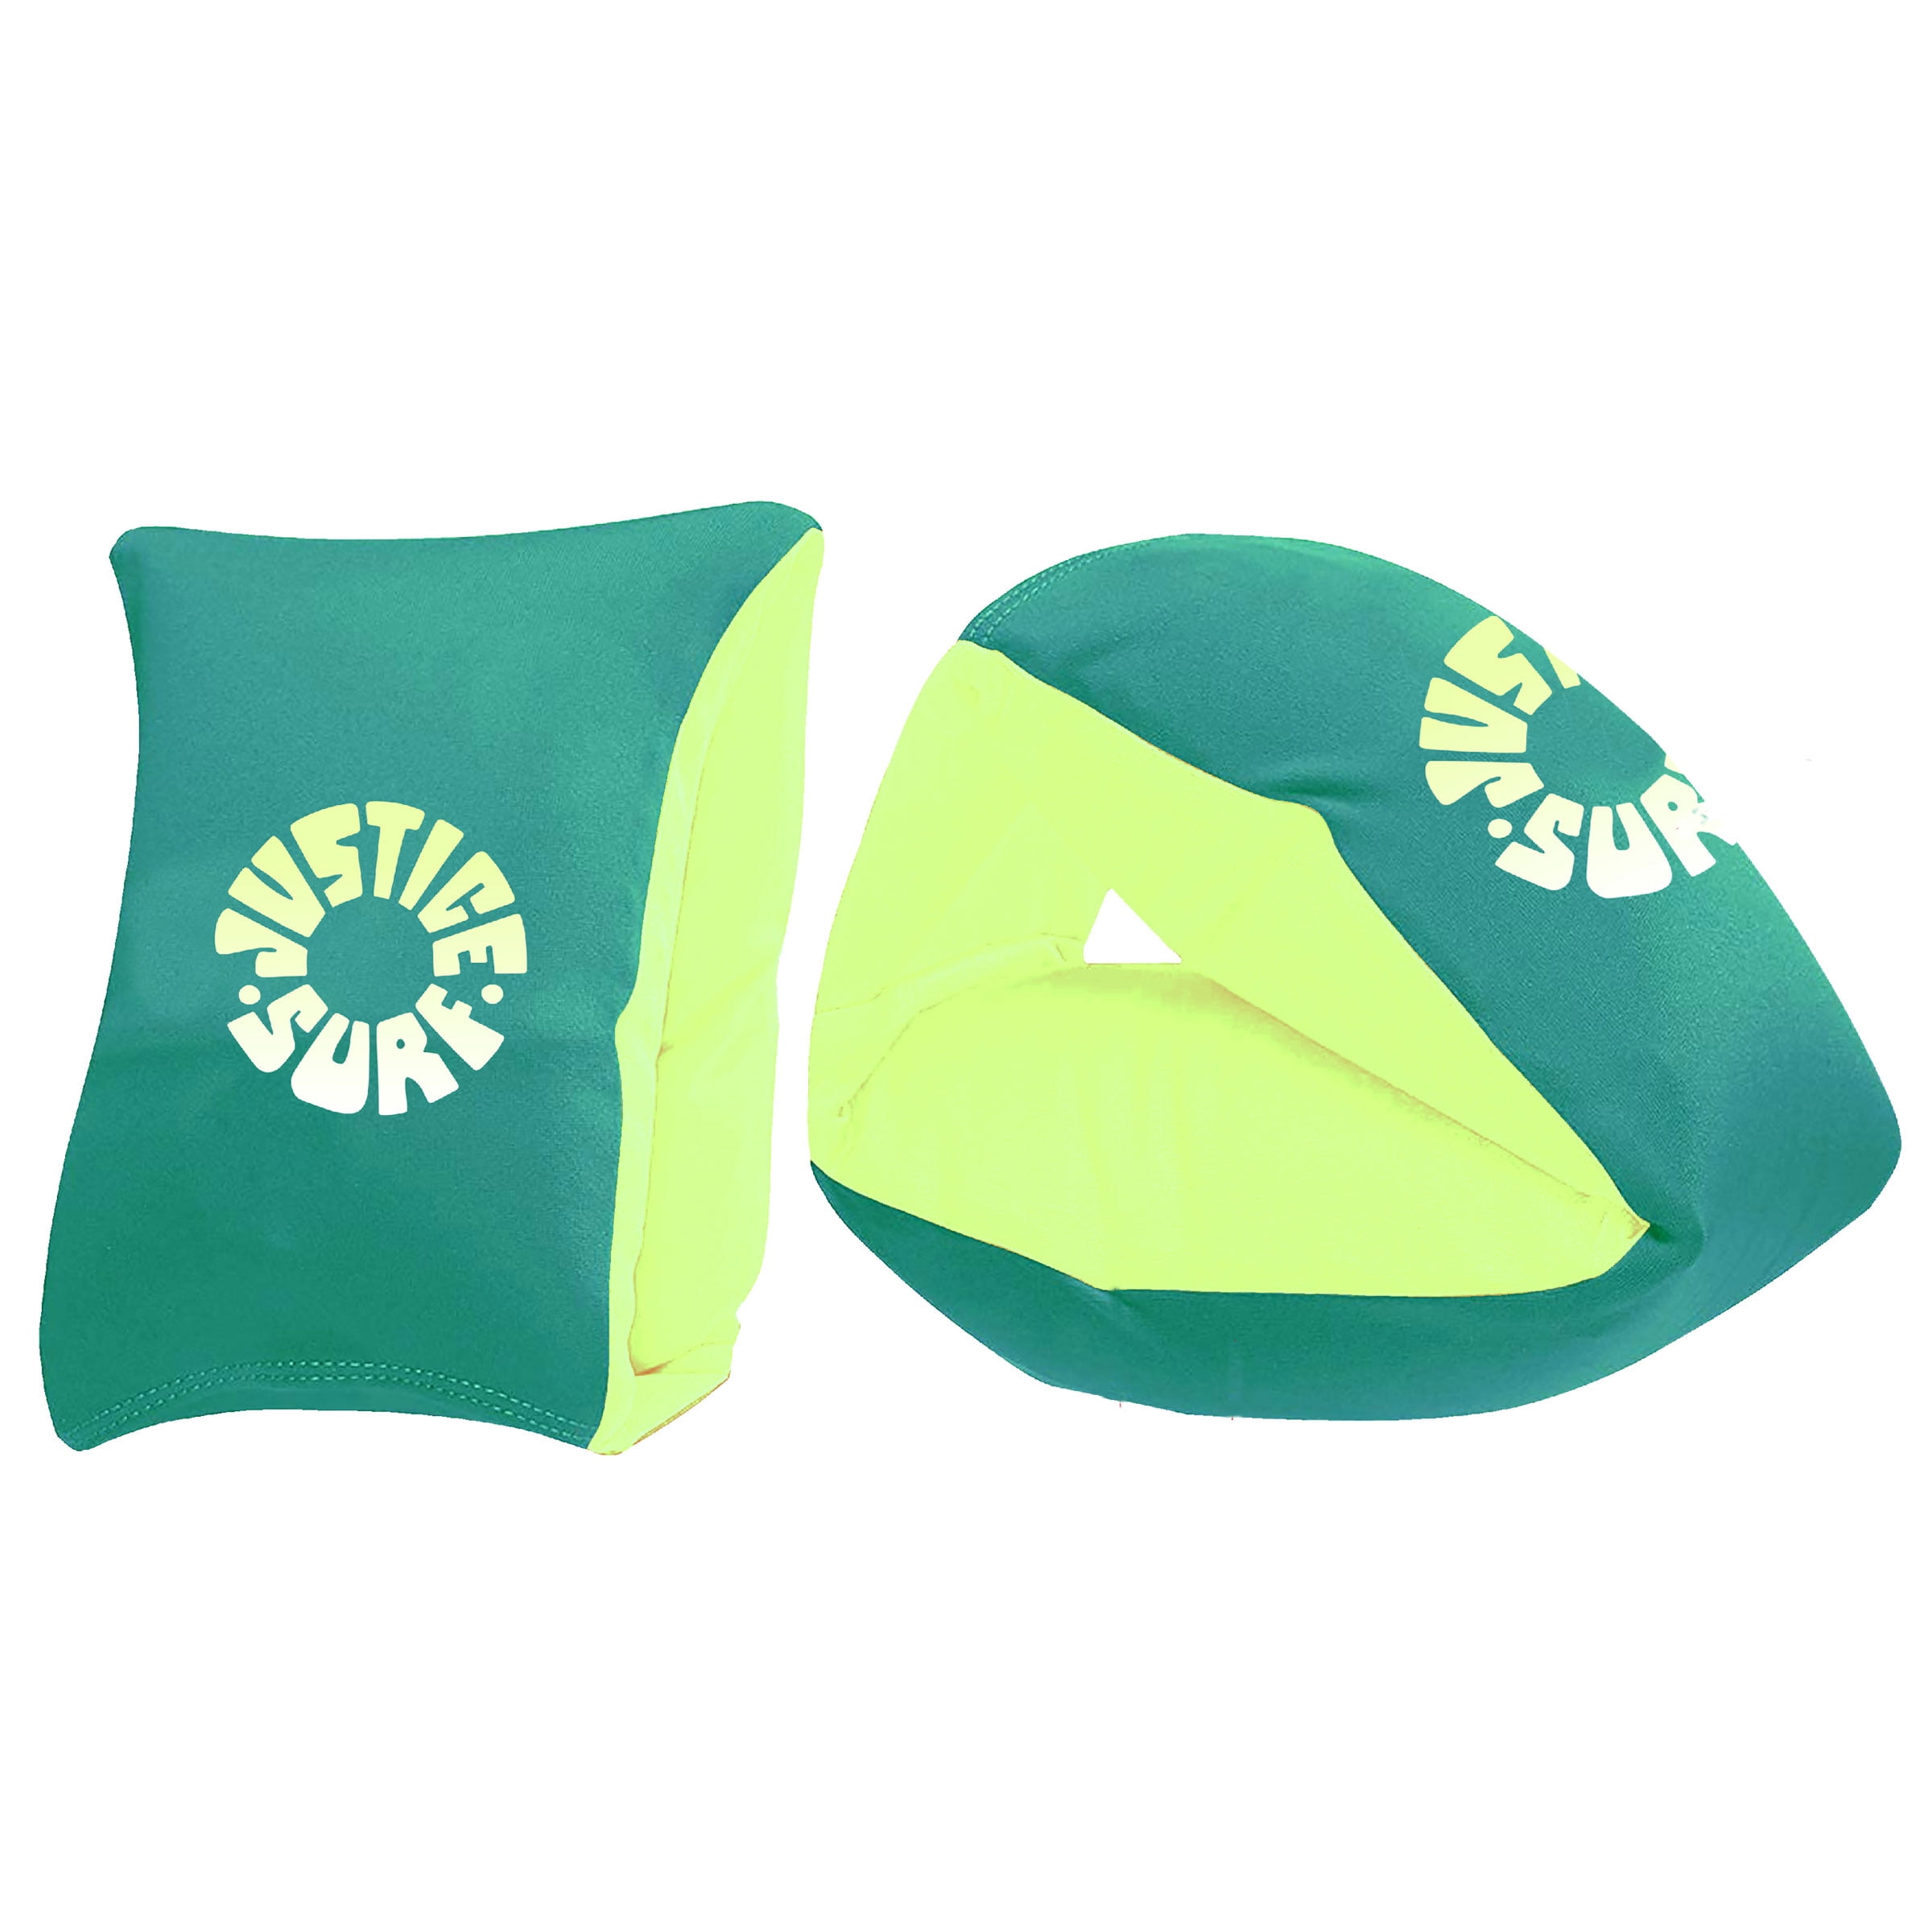 LVacation Beach Pillow S00 - Accessories